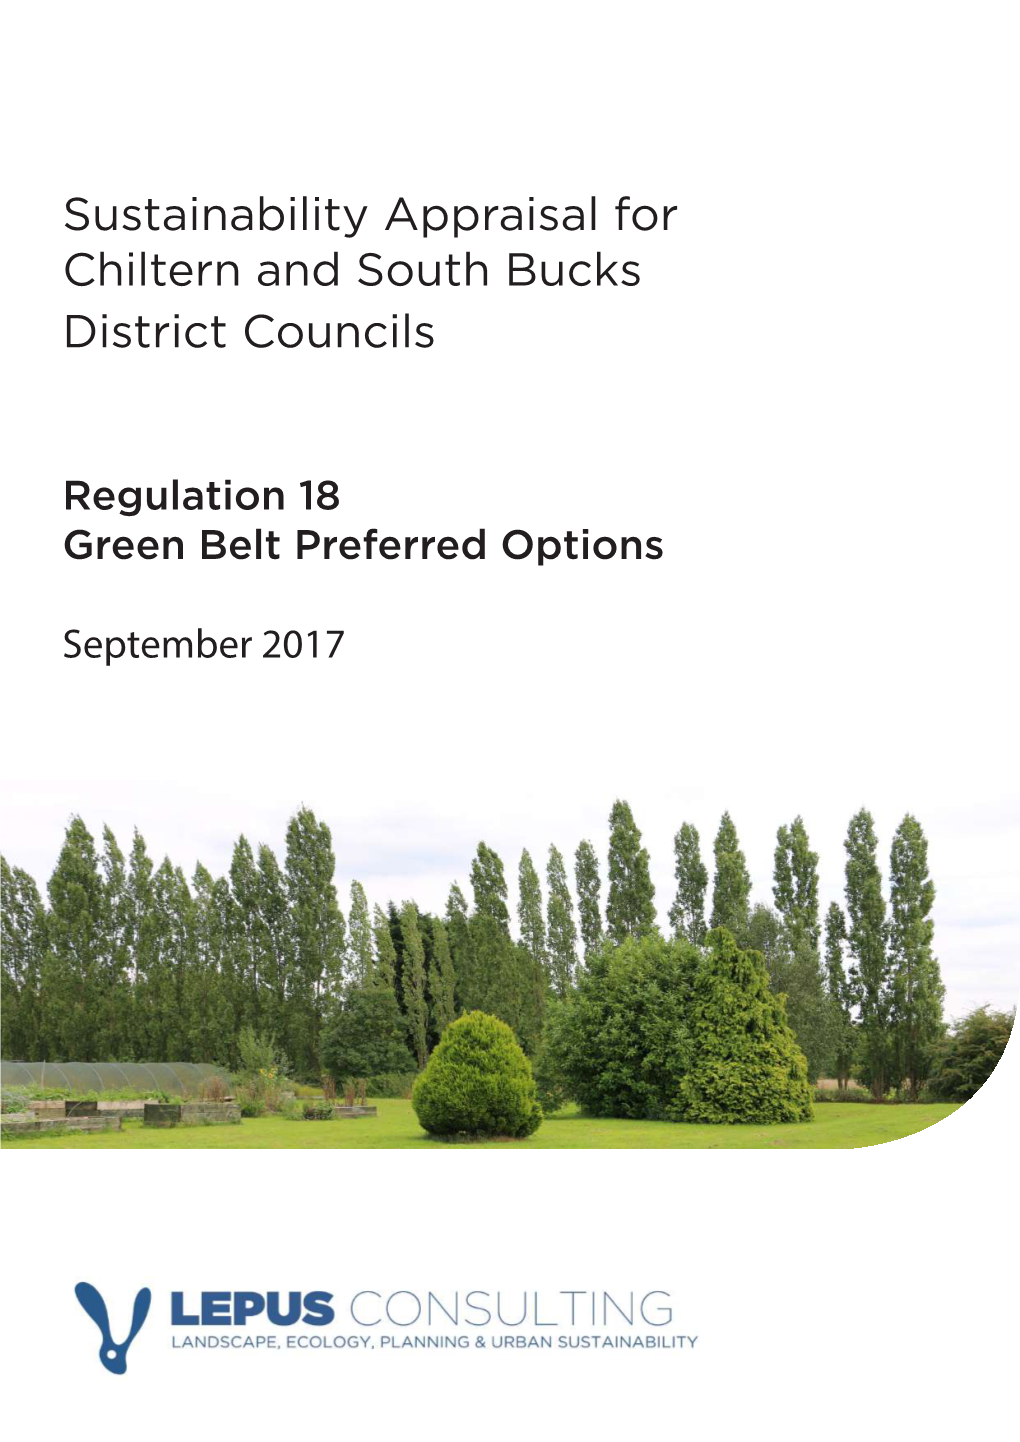 Sustainability Appraisal for Chiltern and South Bucks District Councils